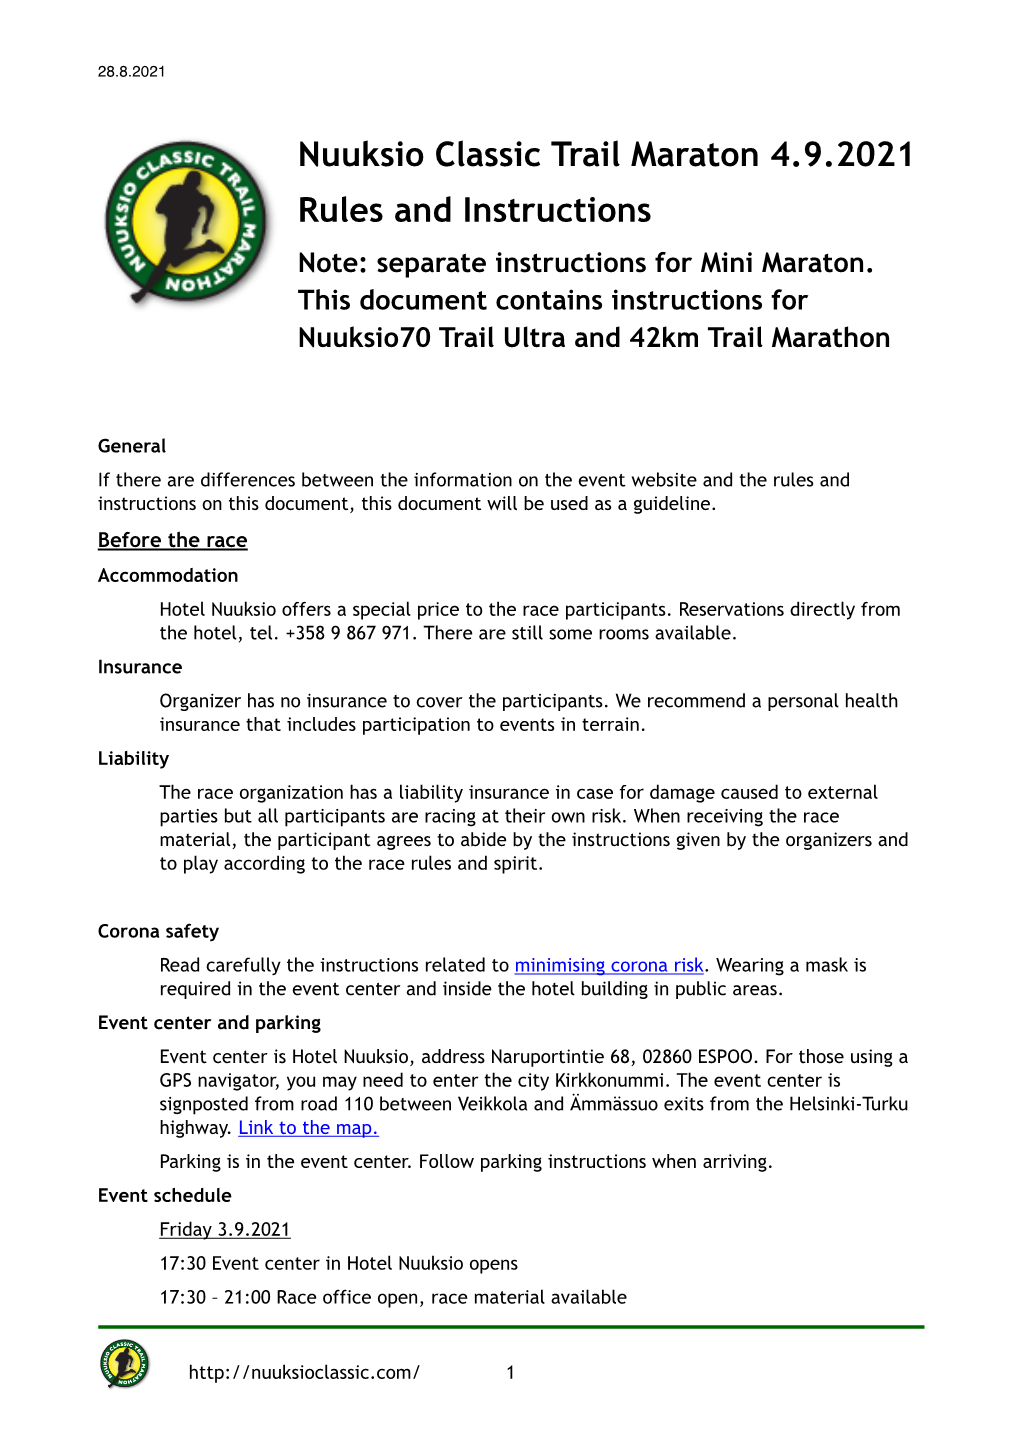 Nuuksio Classic Trail Maraton 4.9.2021 Rules and Instructions Note: Separate Instructions for Mini Maraton